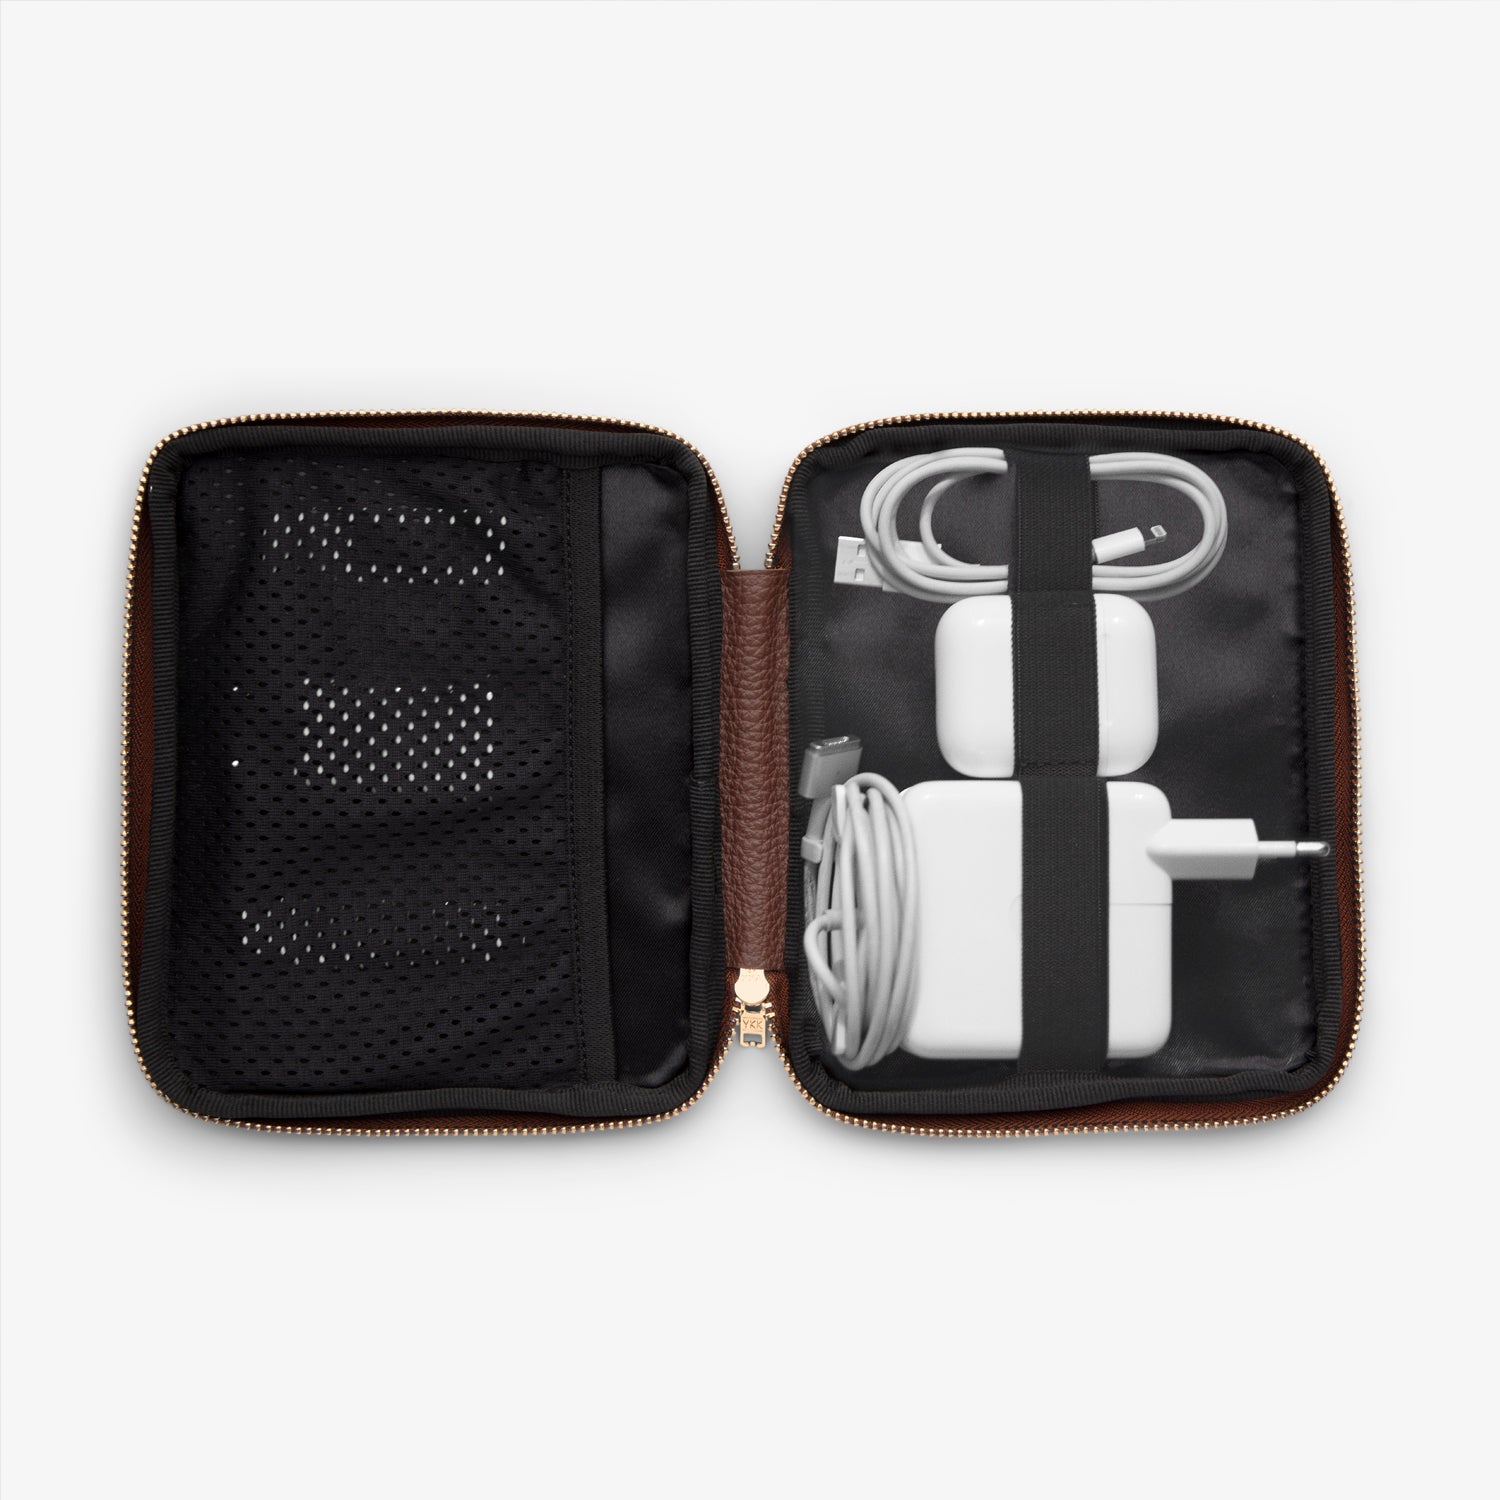 Shows the inside of a cable pocket displaying a computer charger, AirPods, phone charger, and USB stick, all neatly arranged and organized for easy access while on the go.